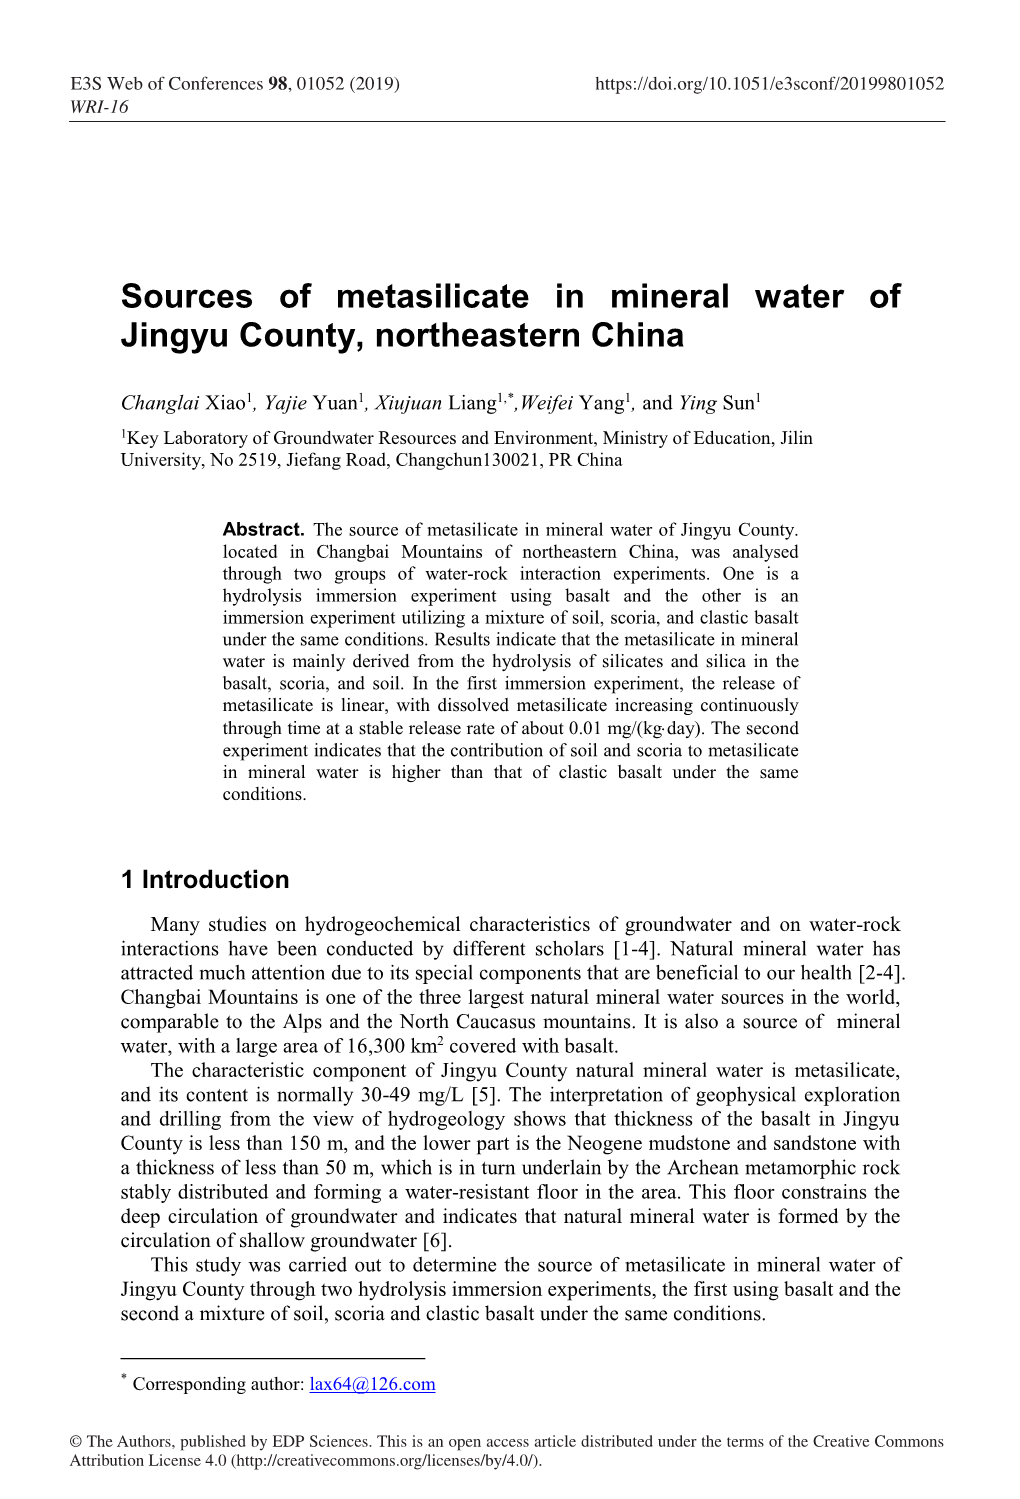 Sources of Metasilicate in Mineral Water of Jingyu County, Northeastern China